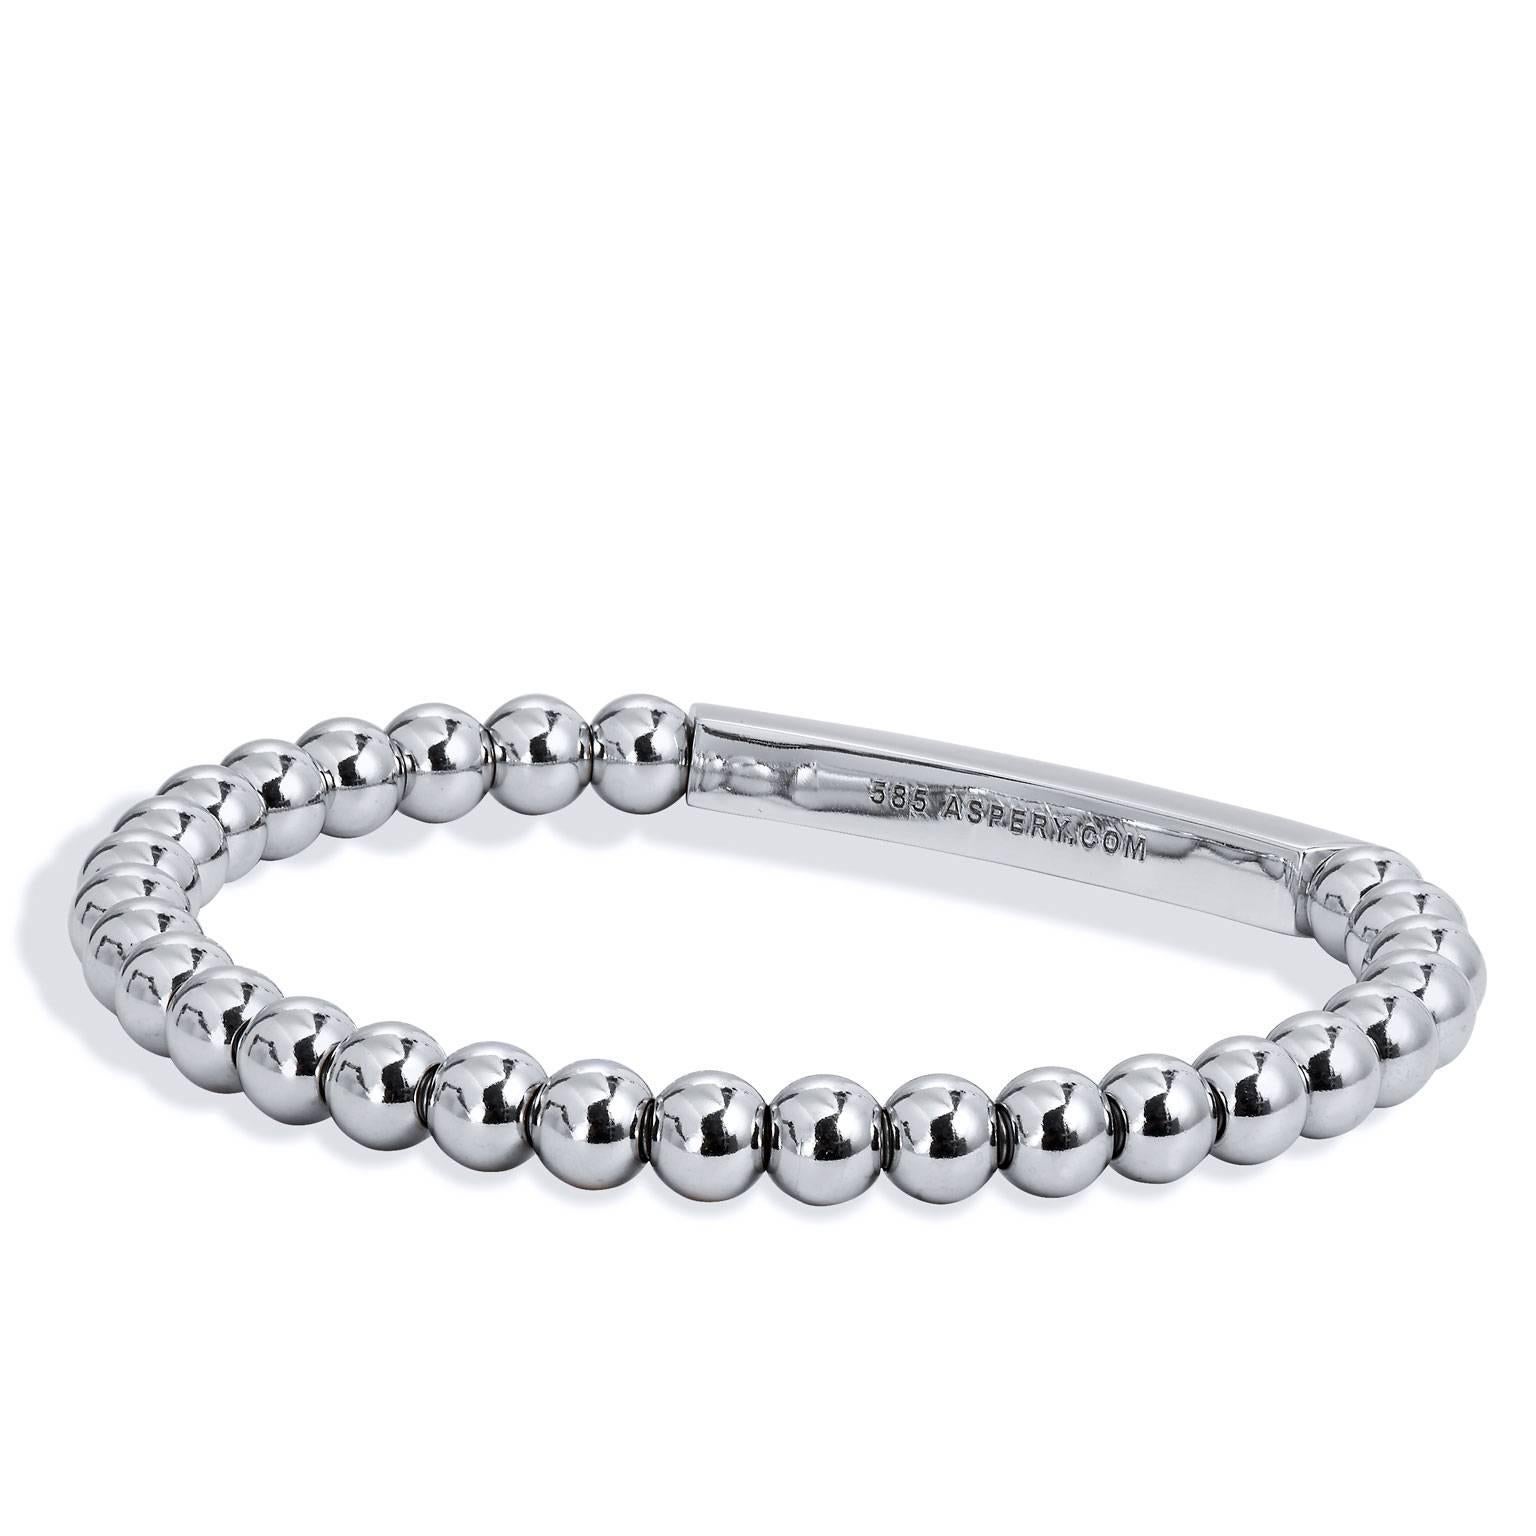 Bracelet with 14 karat white gold beads (5mm bead size), 14 karat white gold two-row rectangular bar embellishment with 0.68 carat of diamond pave set and surgical steel insert.